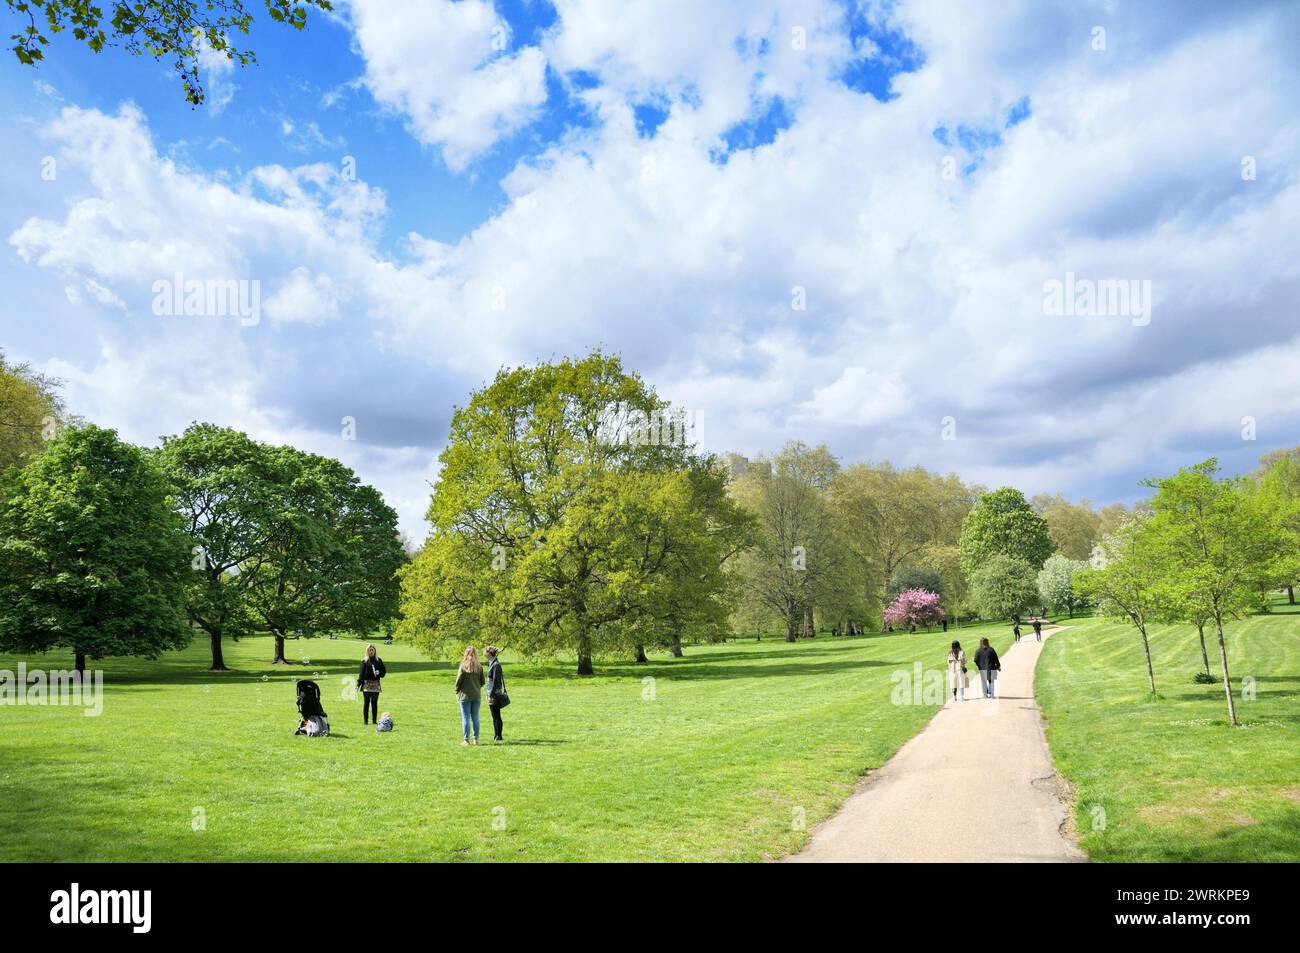 People relaxing and enjoying the spring sunshine and open space of The Green Park, one of London's eight Royal Parks, central London, England, UK Stock Photo